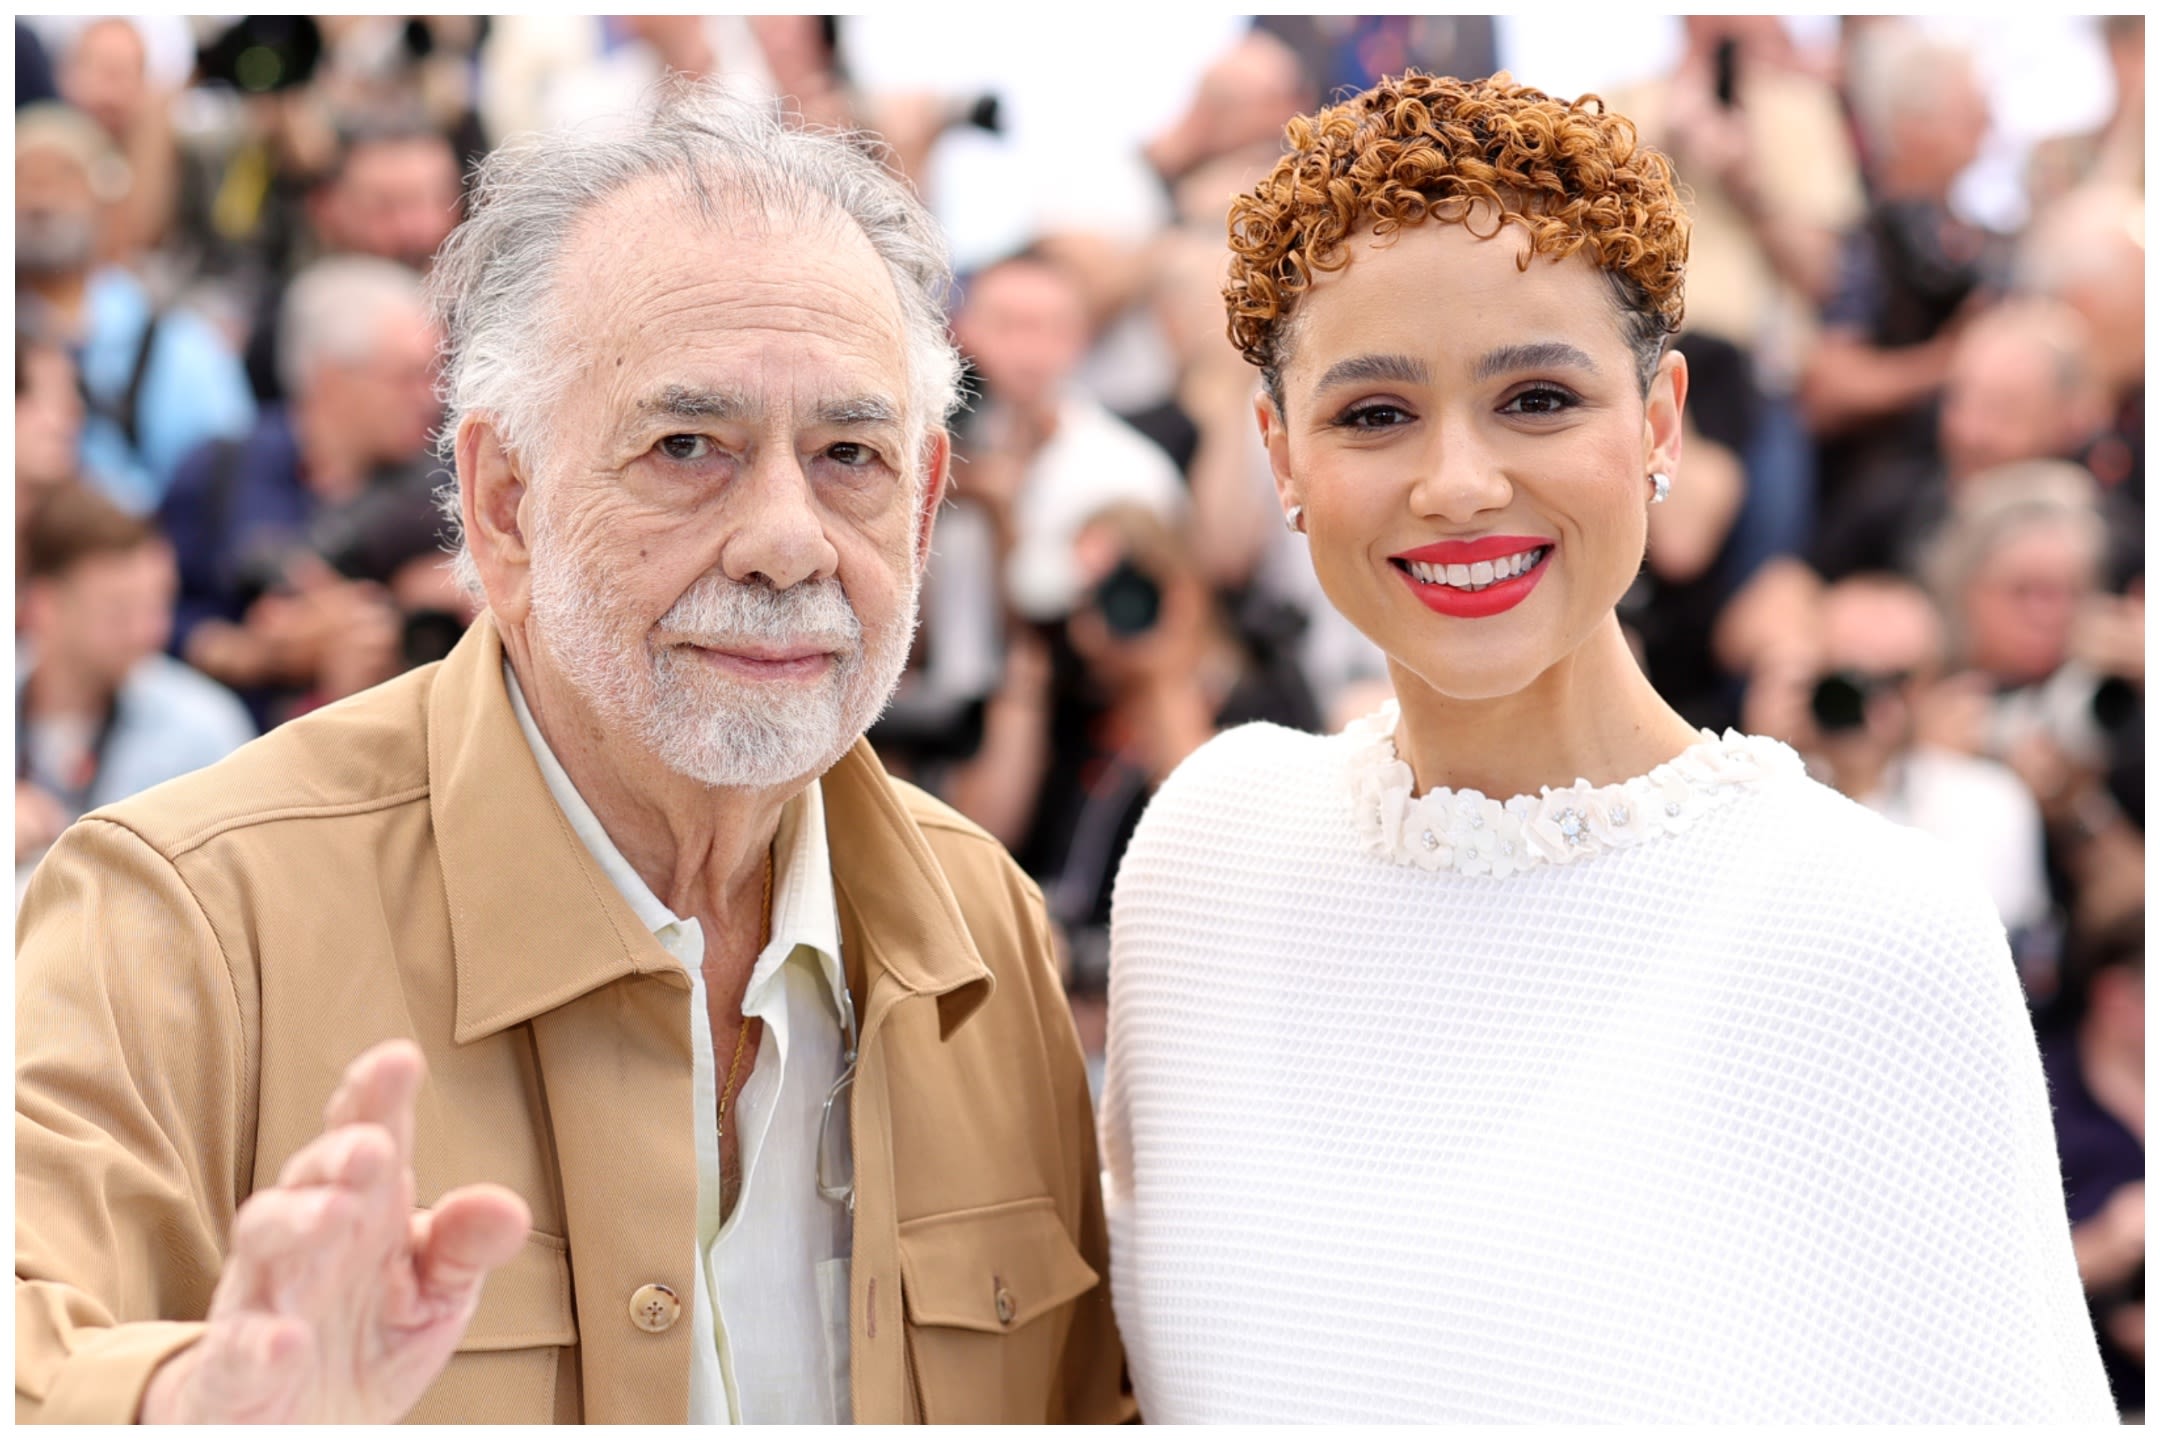 Nathalie Emmanuel on Premiering Francis Ford Coppola’s ‘Megalopolis’ (and Wearing Custom Chanel) for Her Cannes Debut: ‘It Was Quite...